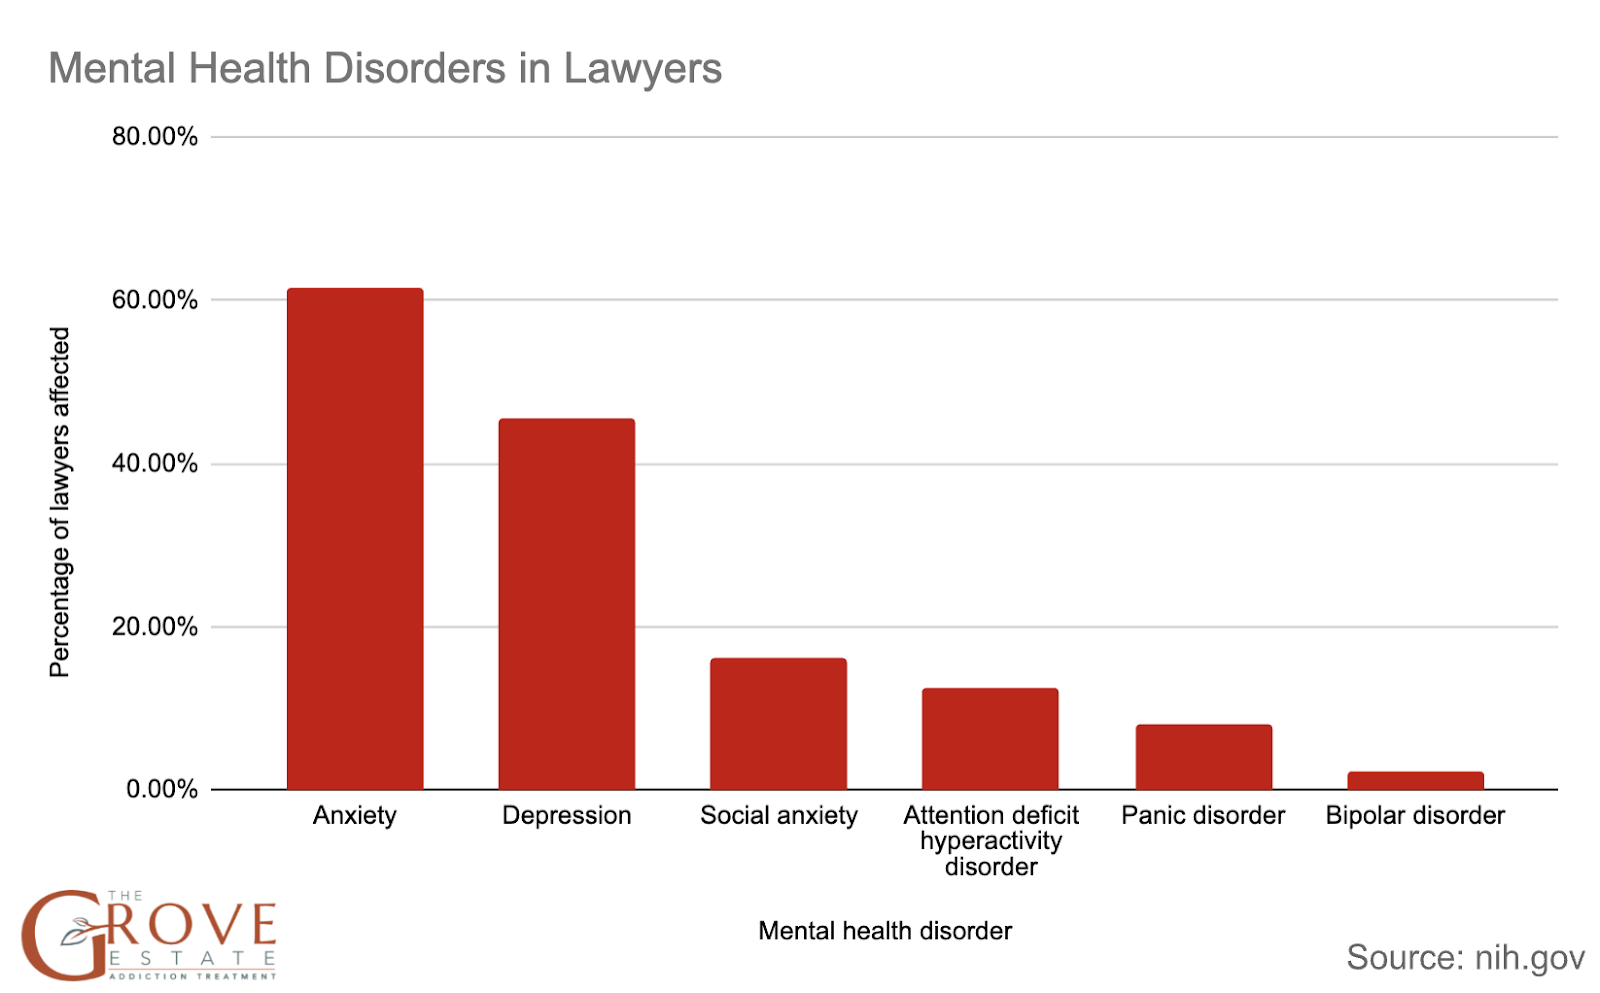 Mental Health Disorders in Lawyers